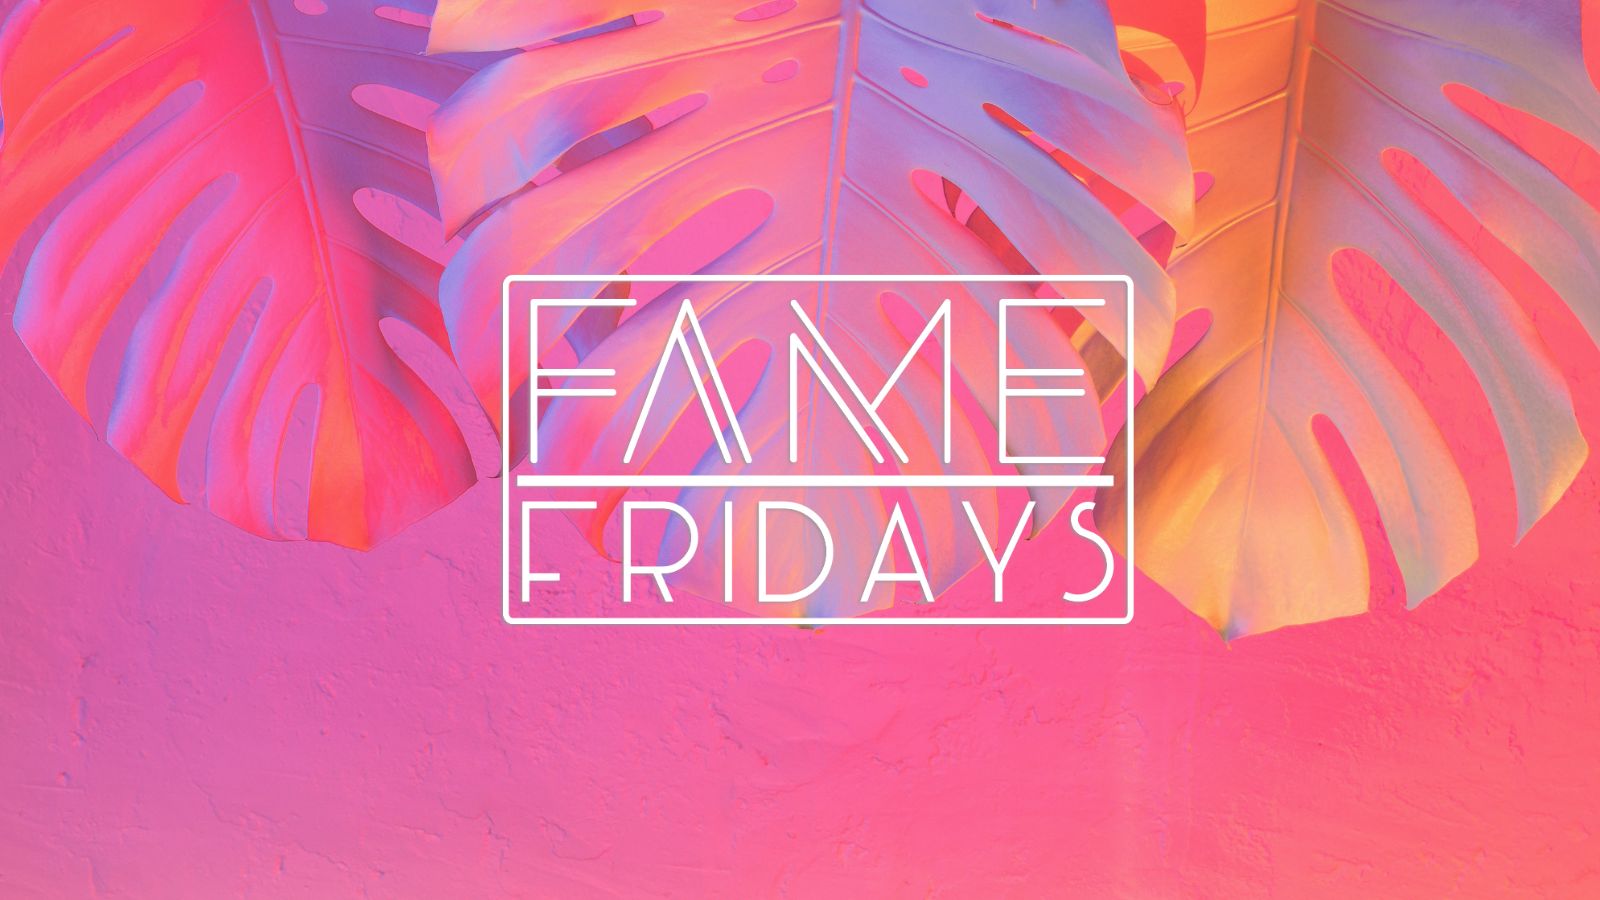 SOBAR – FAME FRIDAY’s presents PADDY’S WEEKEND